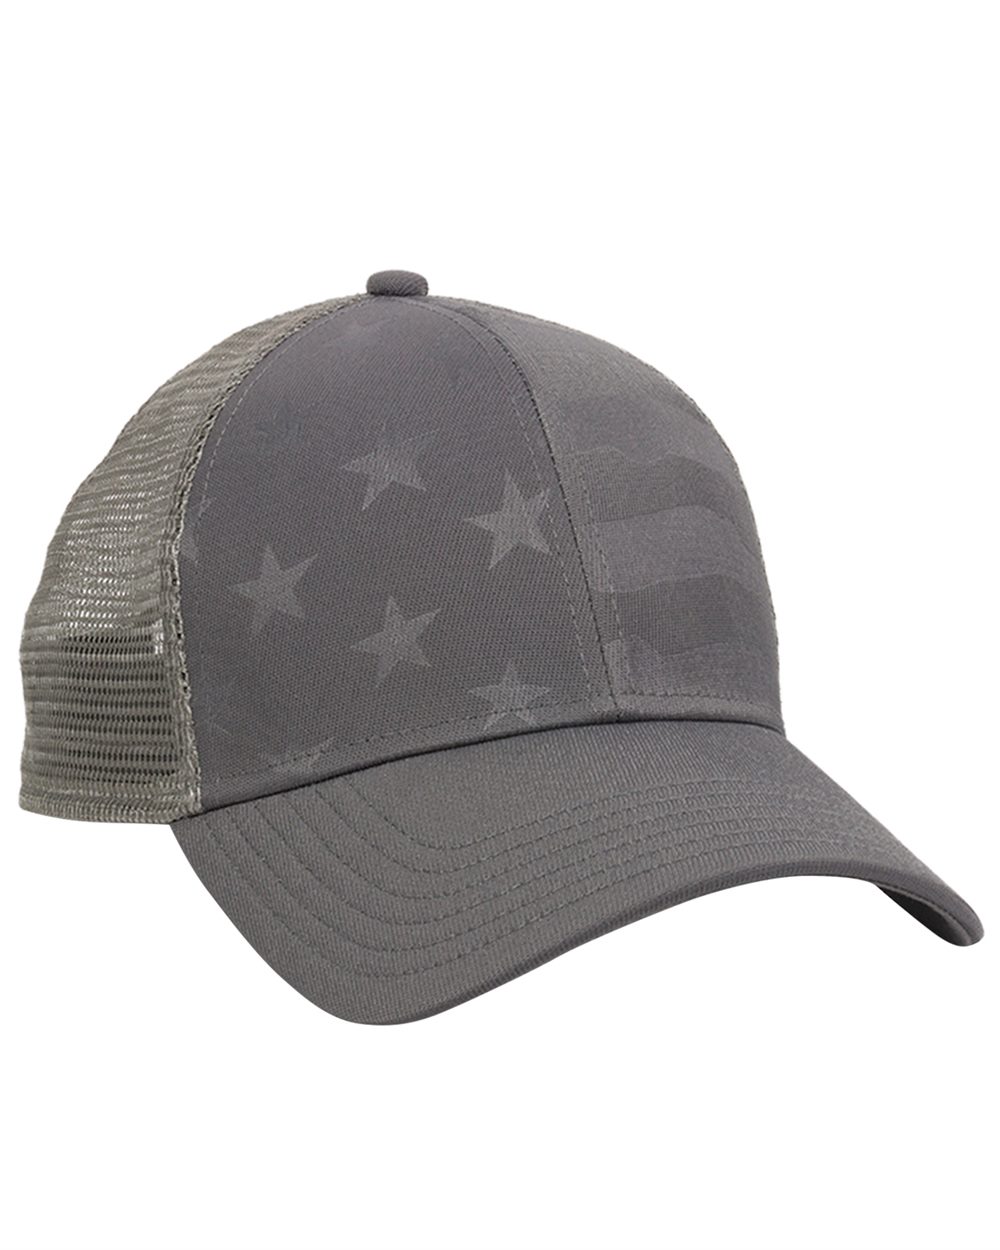 Outdoor Cap USA750M - Debossed Stars and Stripes with Mesh Back